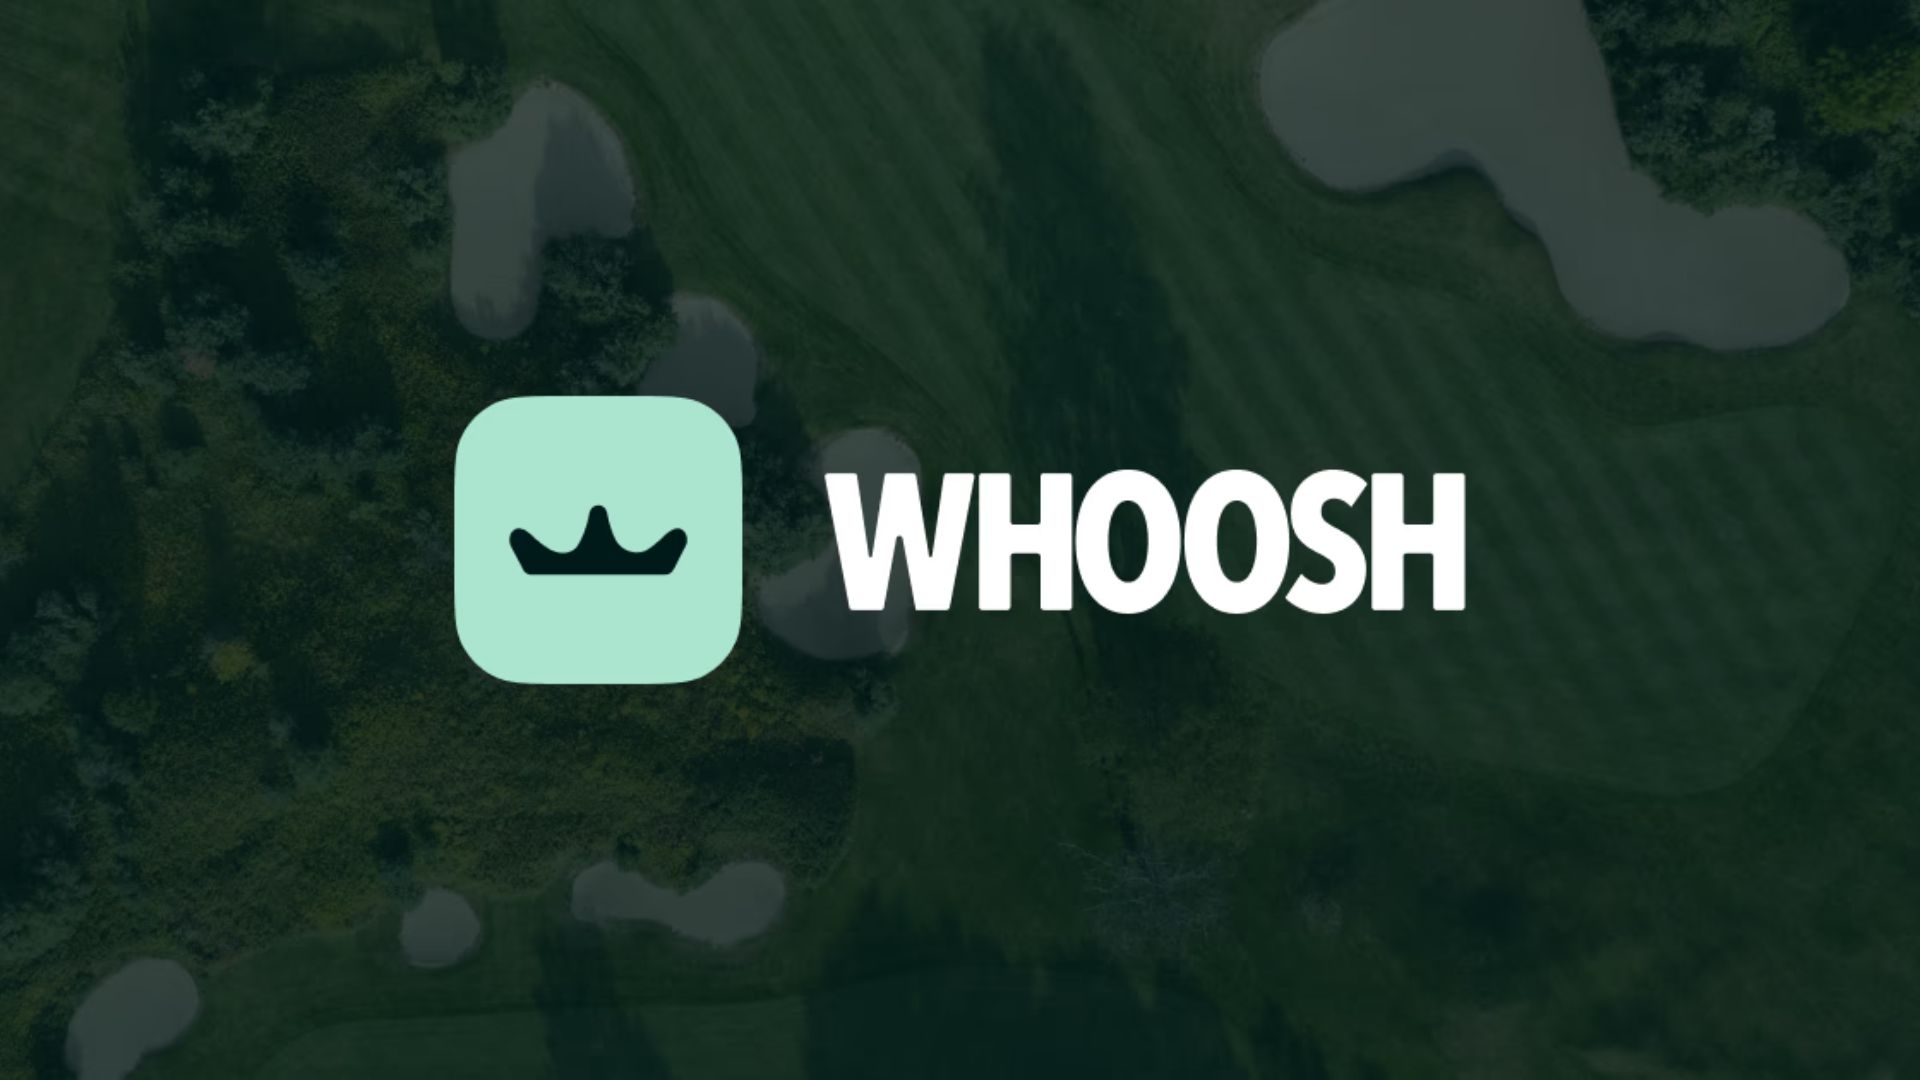 Whoosh Secures $10.3M Series A Funding, Led by AlleyCorp